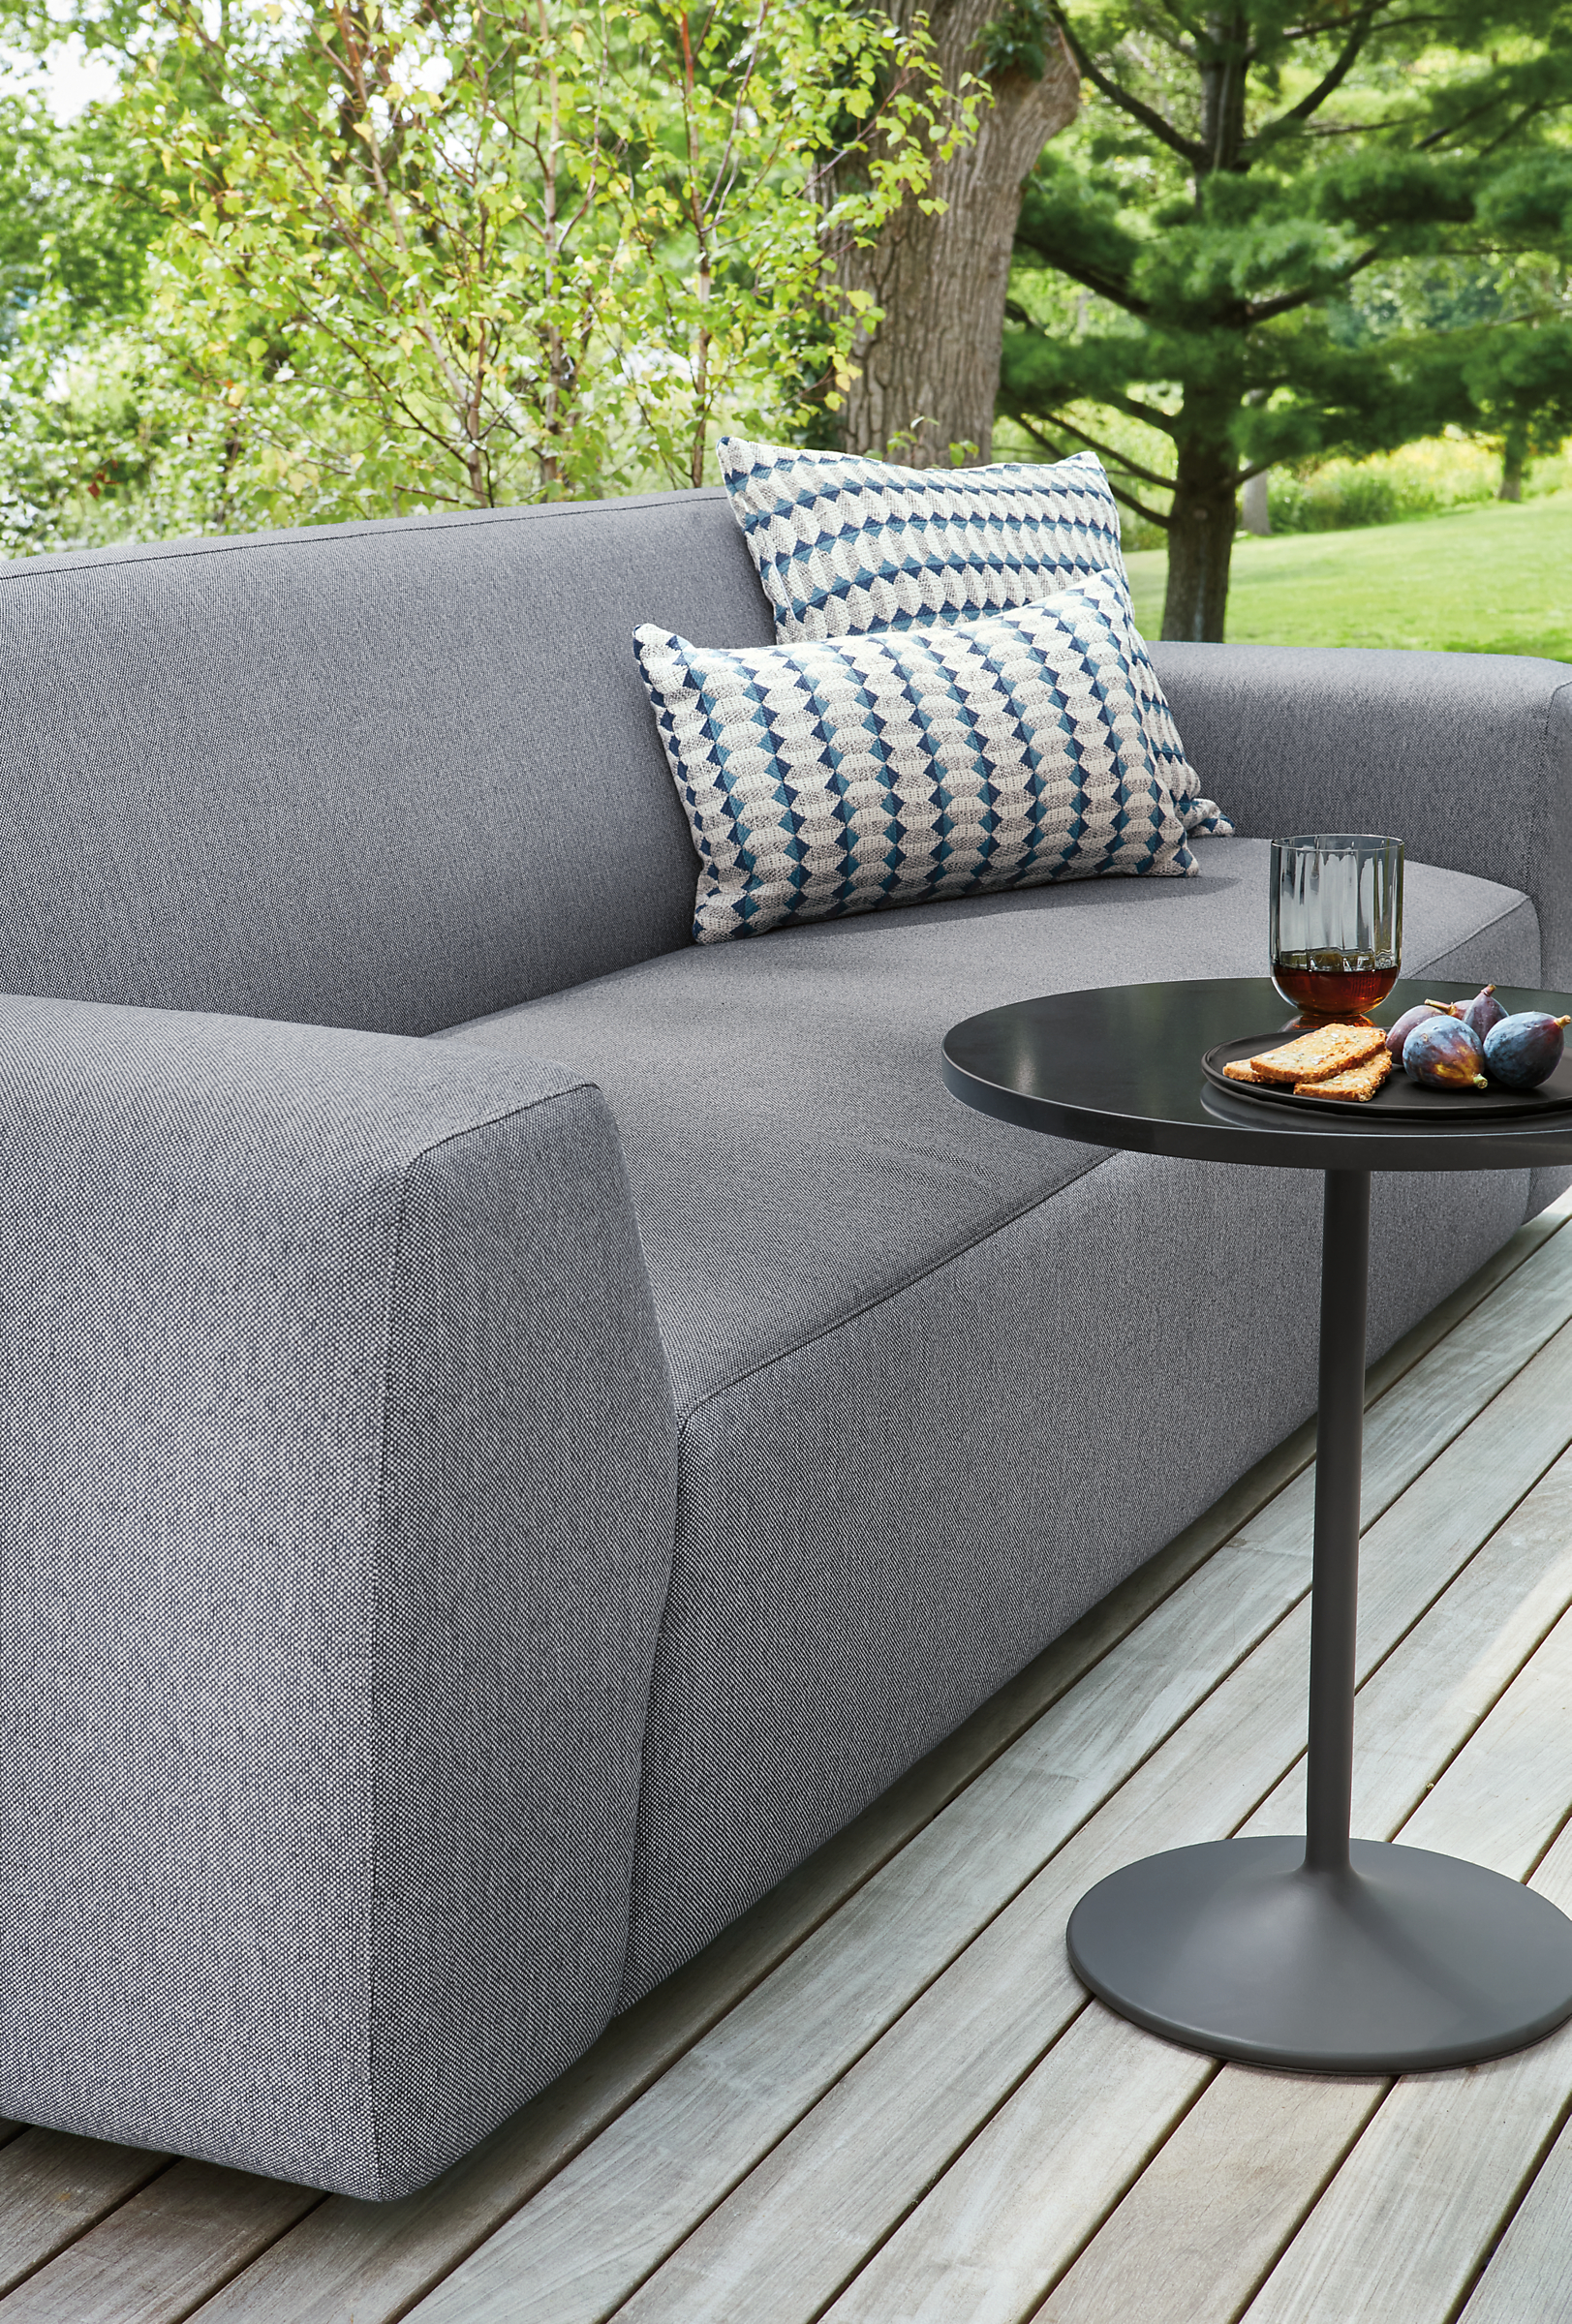 Outdoor space with Drift outdoor sofa and Aria outdoor side table.